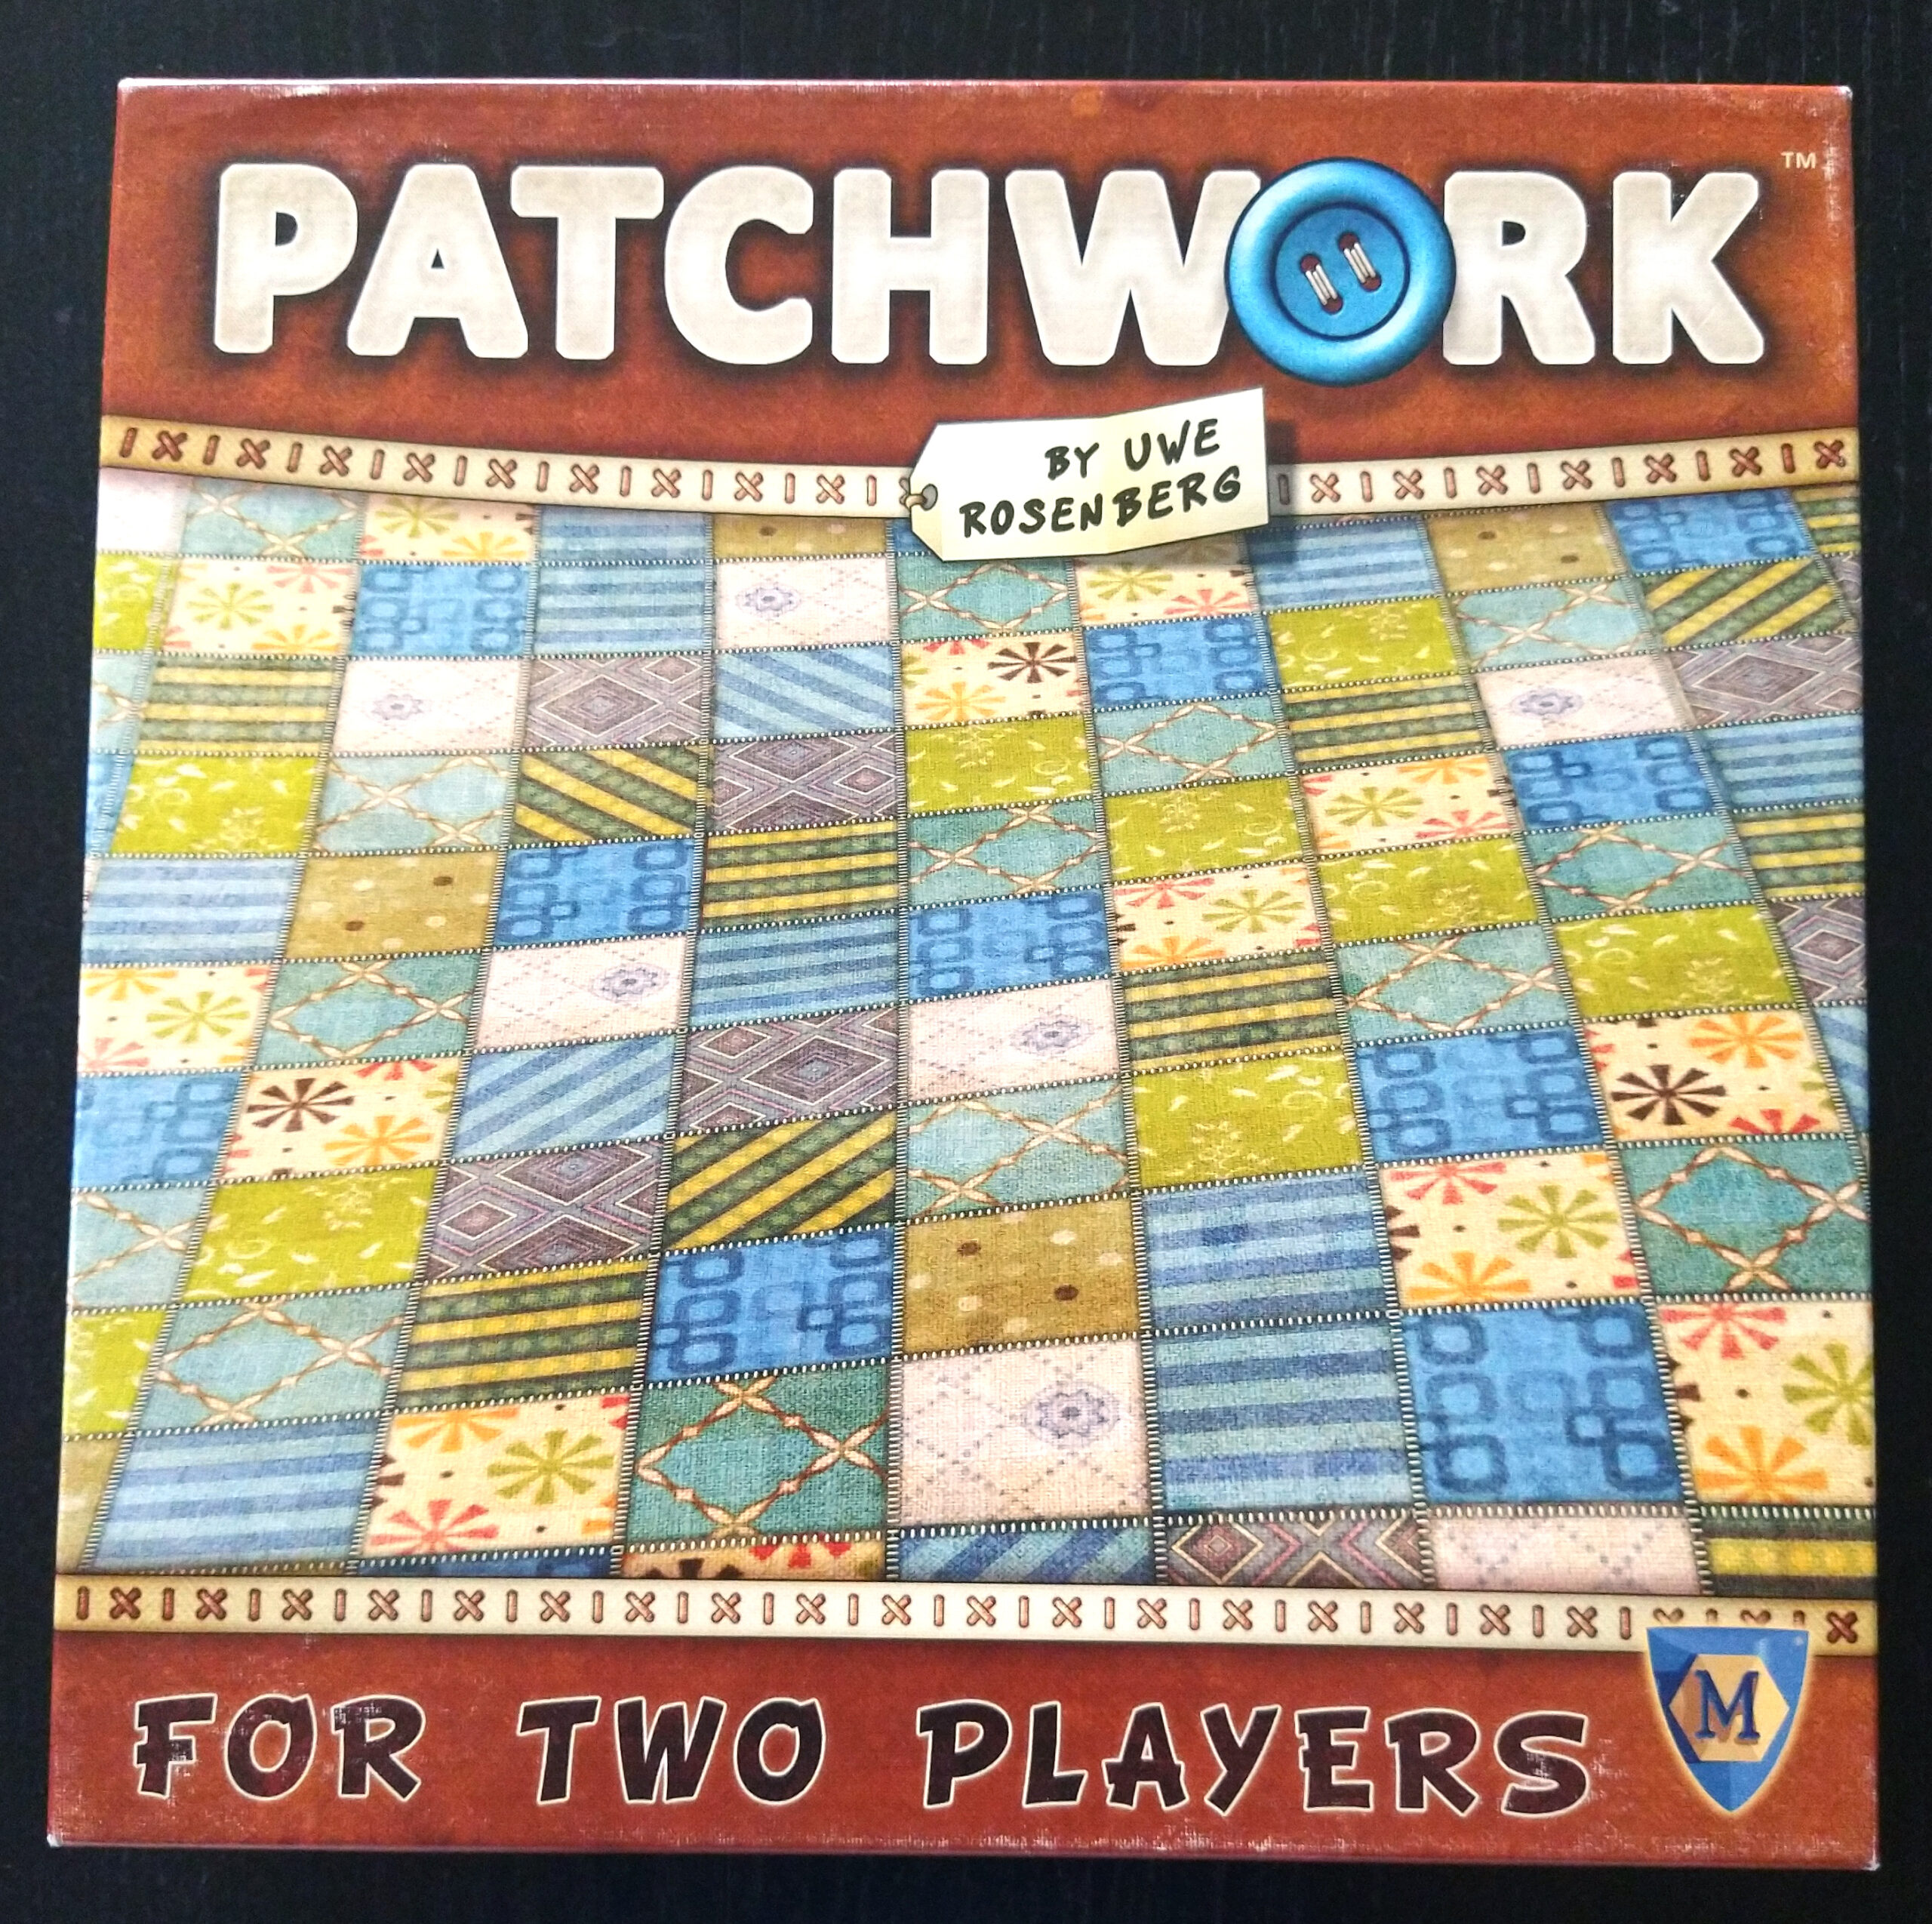 The game Patchwork